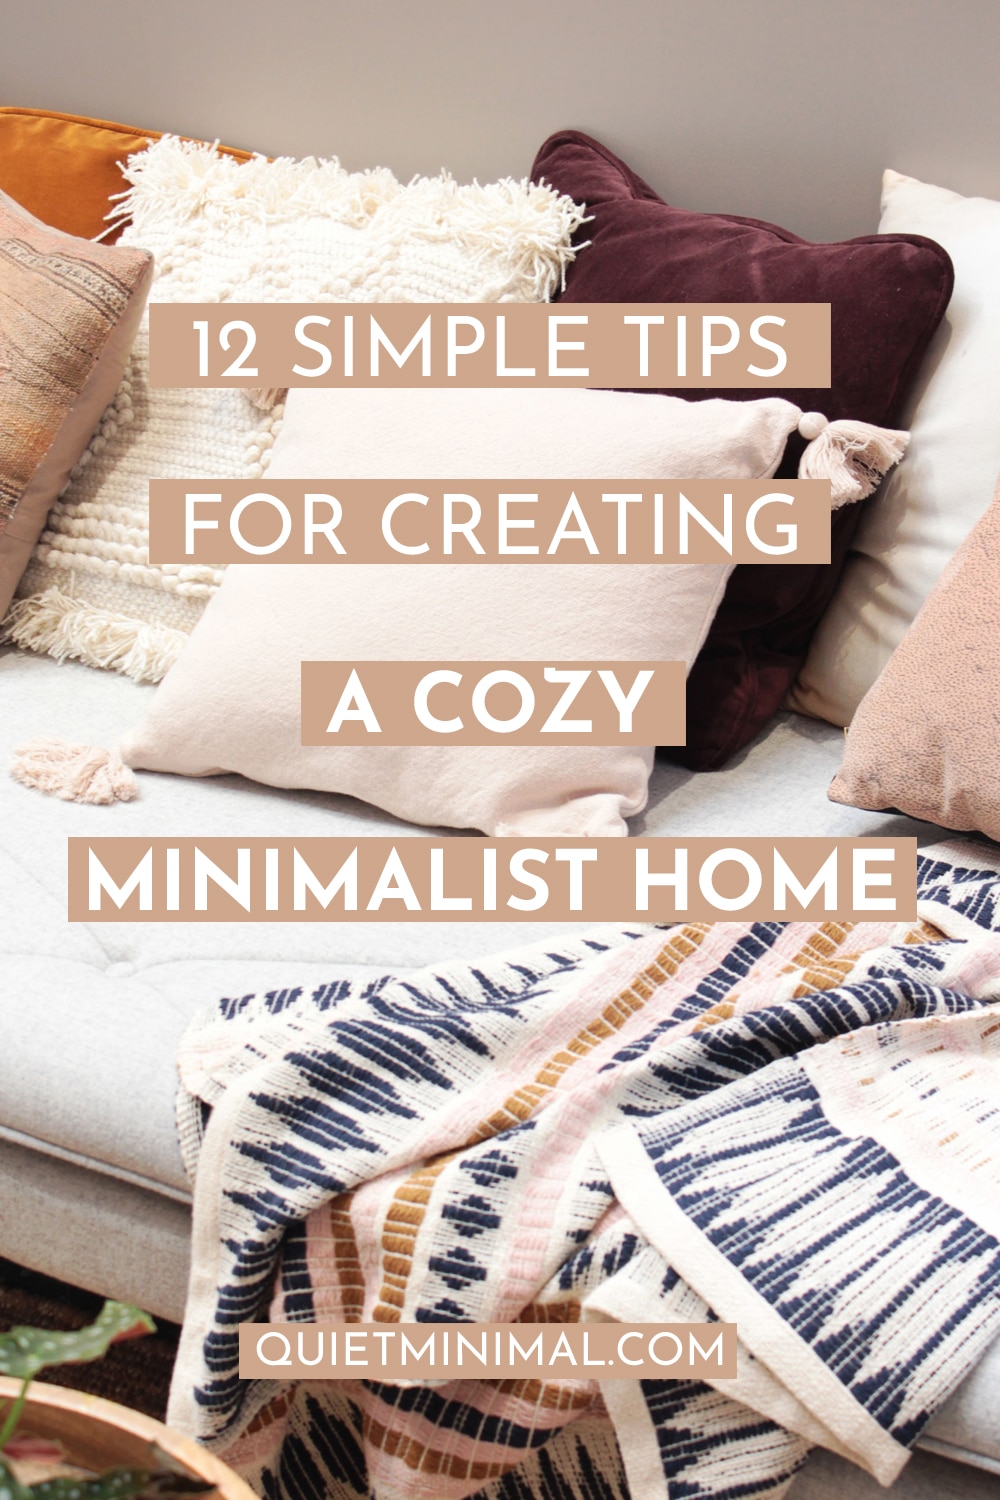 How to create a cozy minimalist home